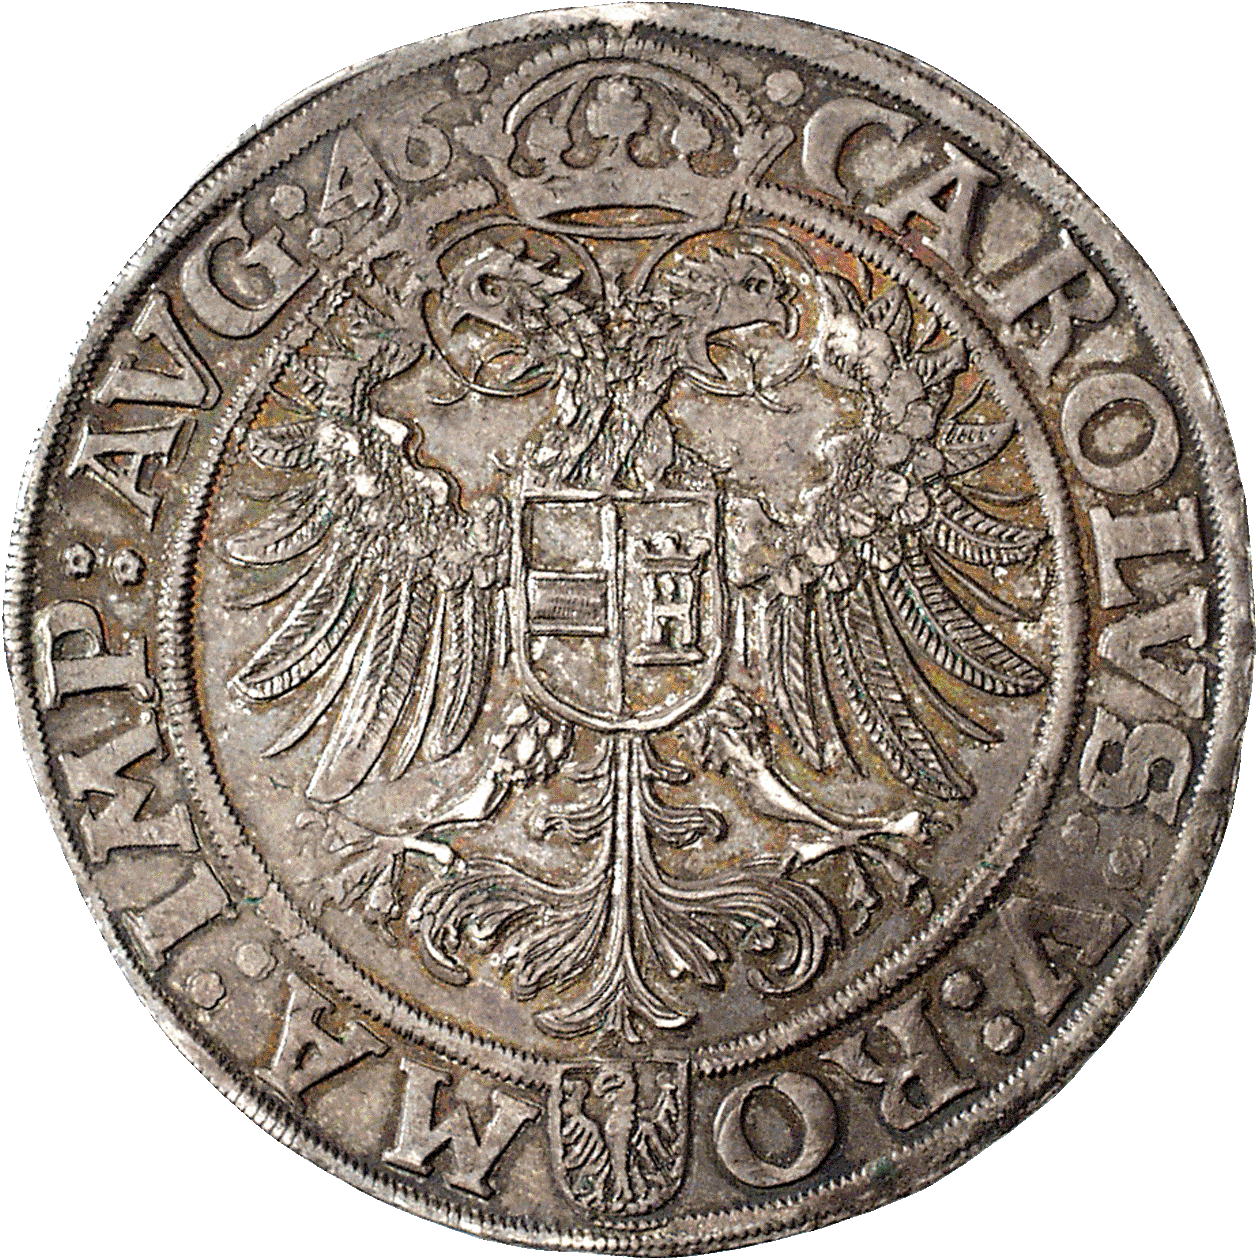 Holy Roman Empire, Louis II of Stolberg in the Name of Charles V, Taler 1546 (obverse)